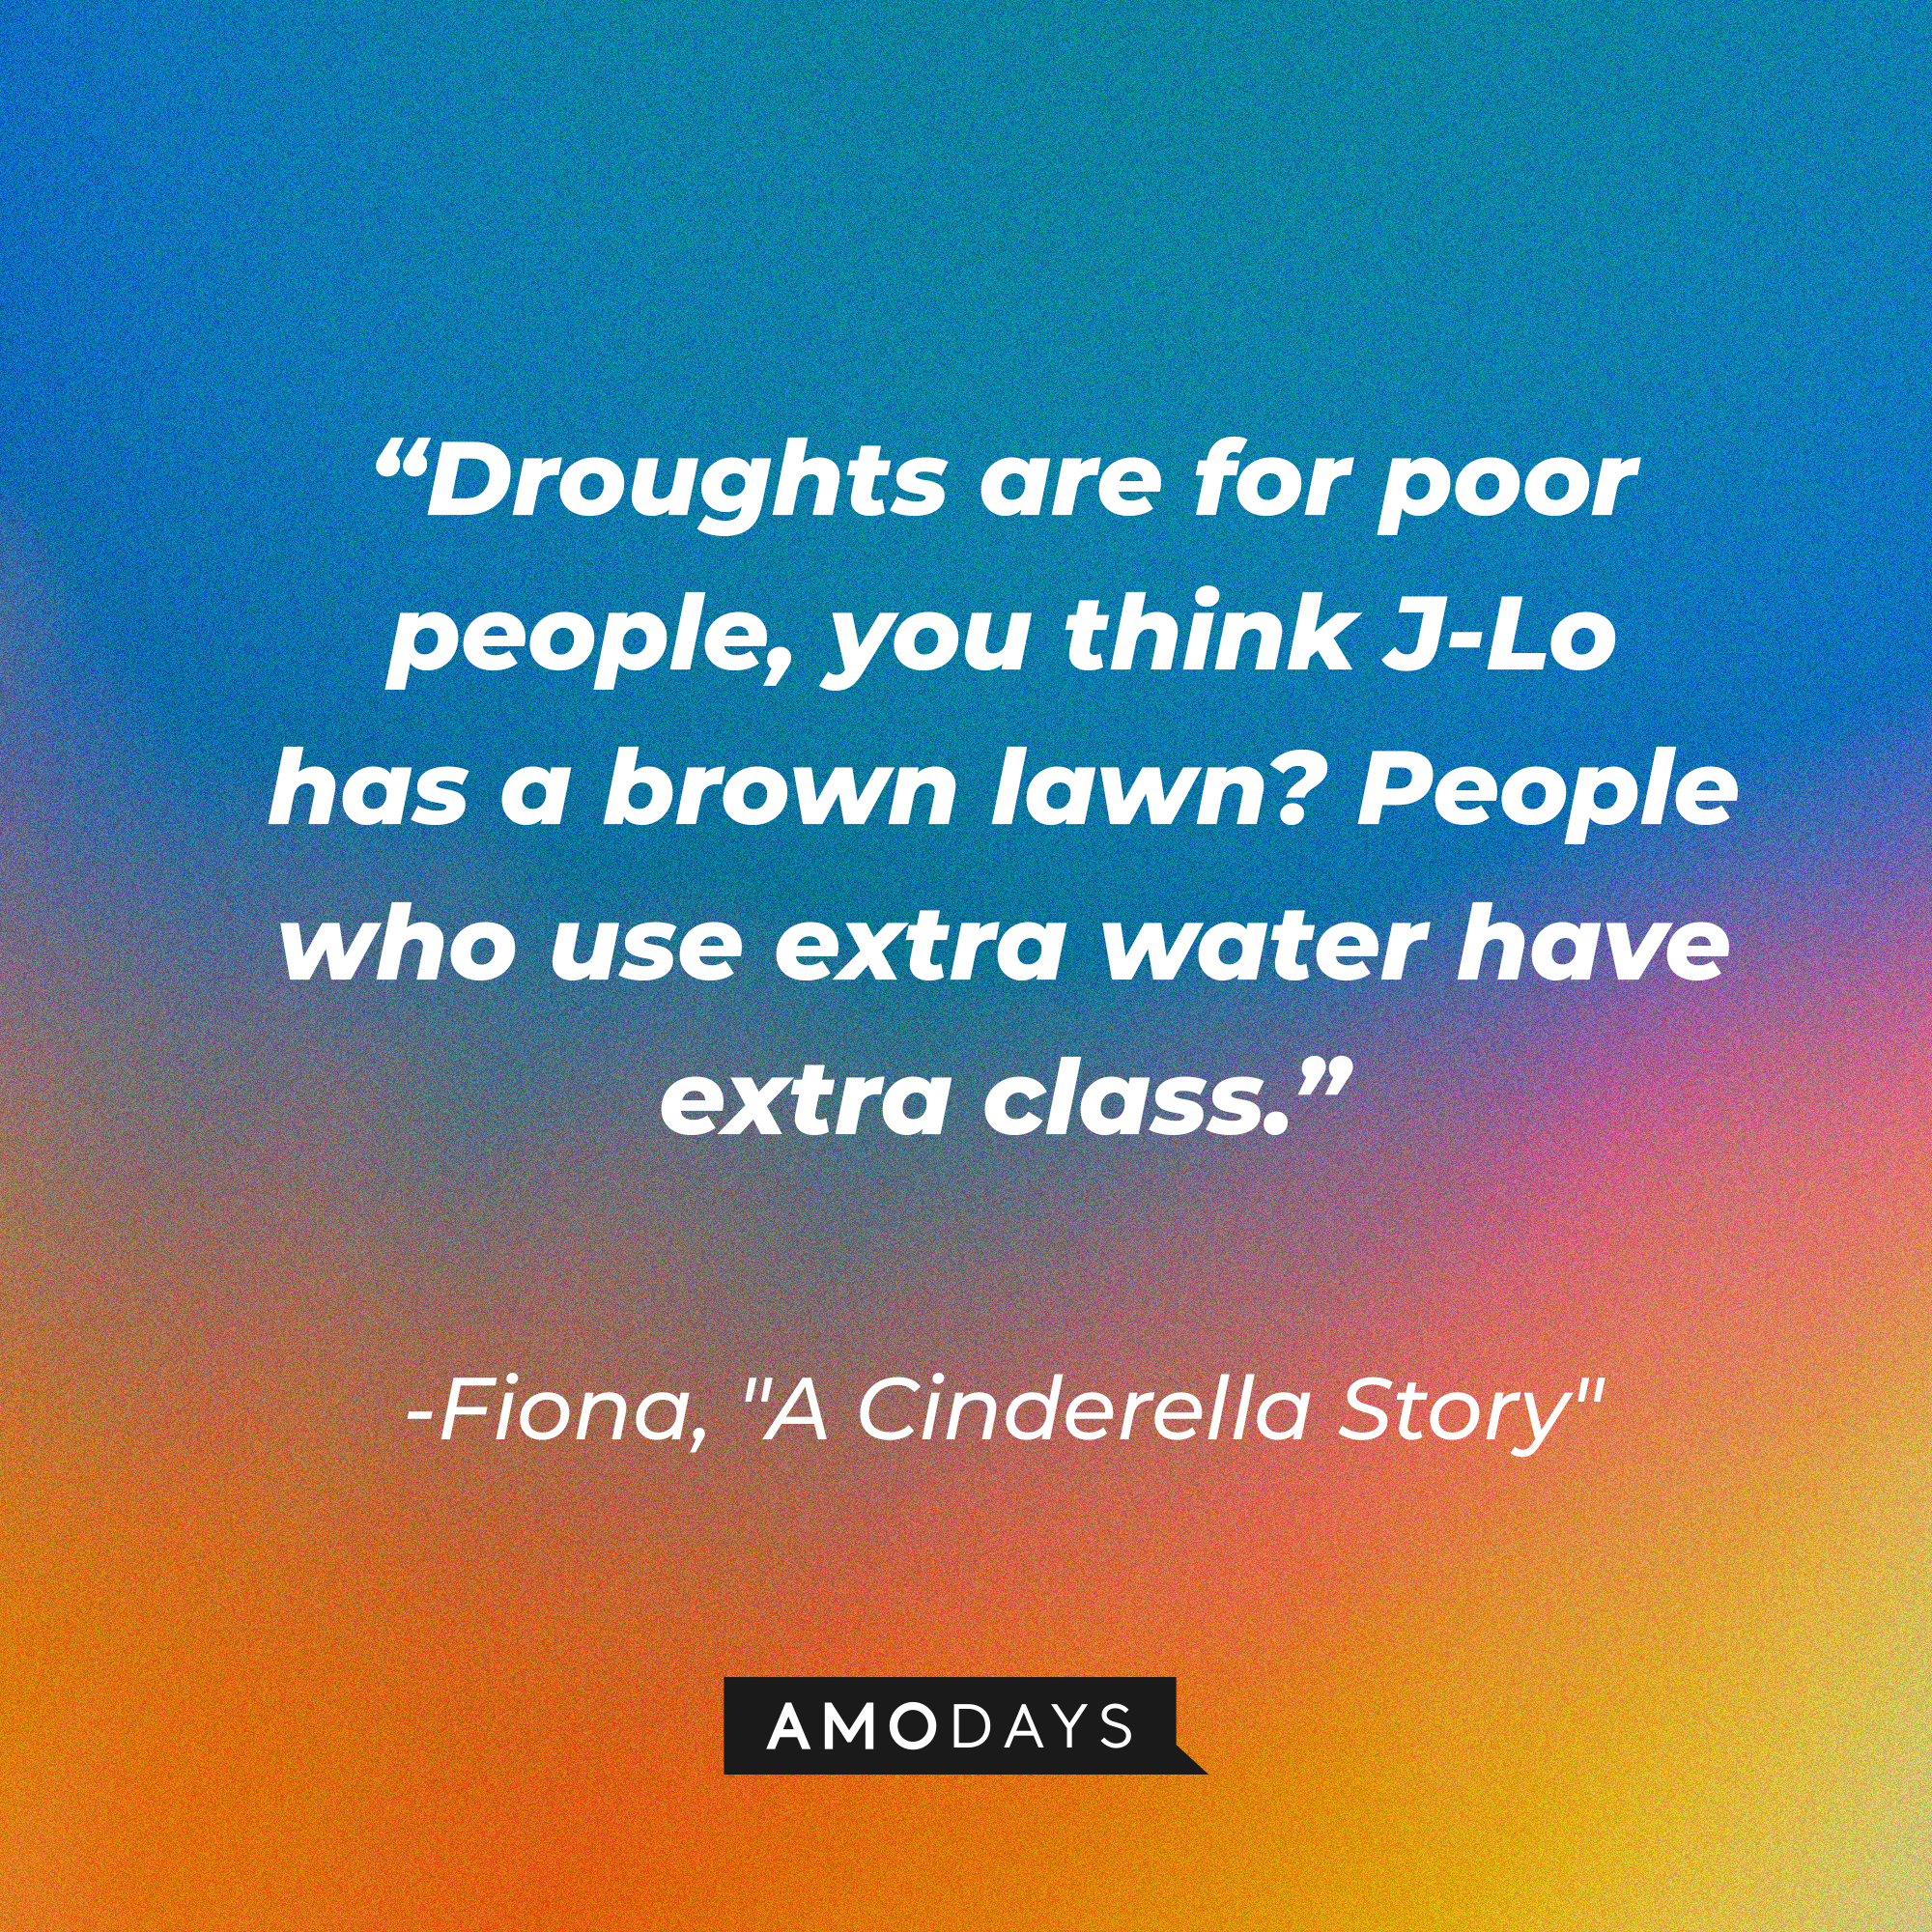 Fiona's dialogue with Austin Ames from "A Cinderella Story:" “Droughts are for poor people, you think J-Lo has a brown lawn? People who use extra water have extra class.” | Source: Youtube.com/warnerbrosentertainment